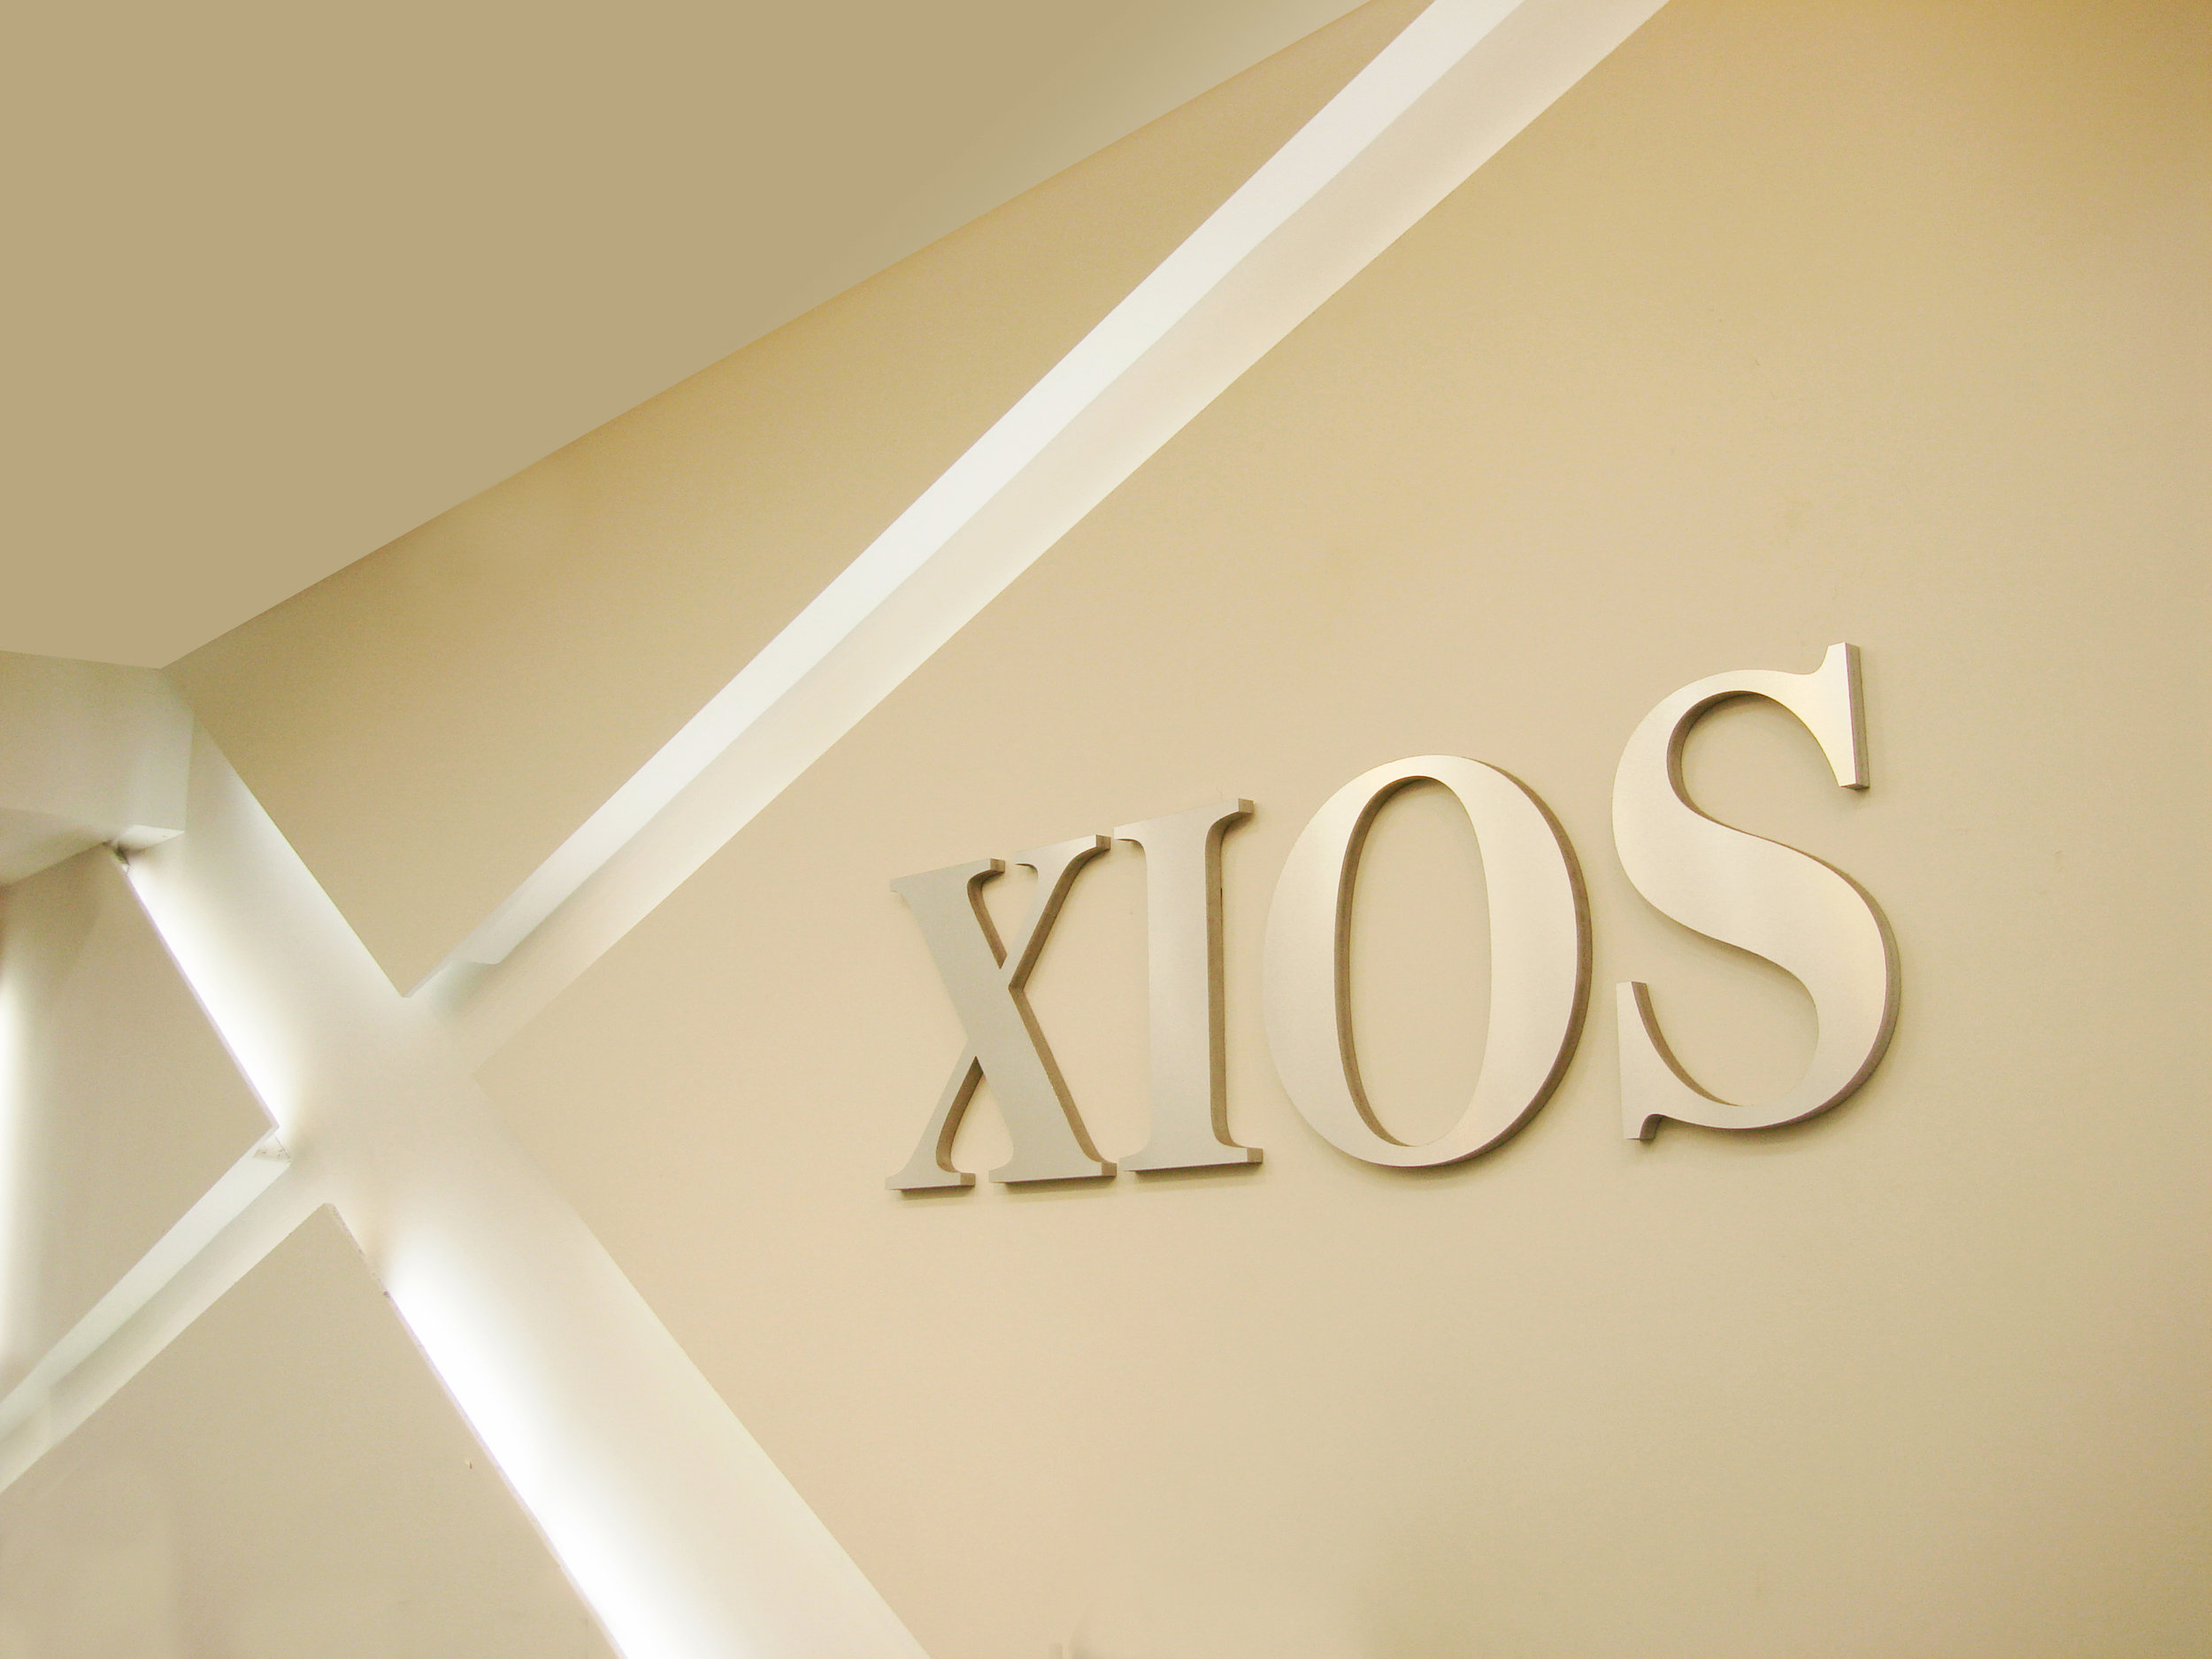 XIOS - 82ND ST (Copy)